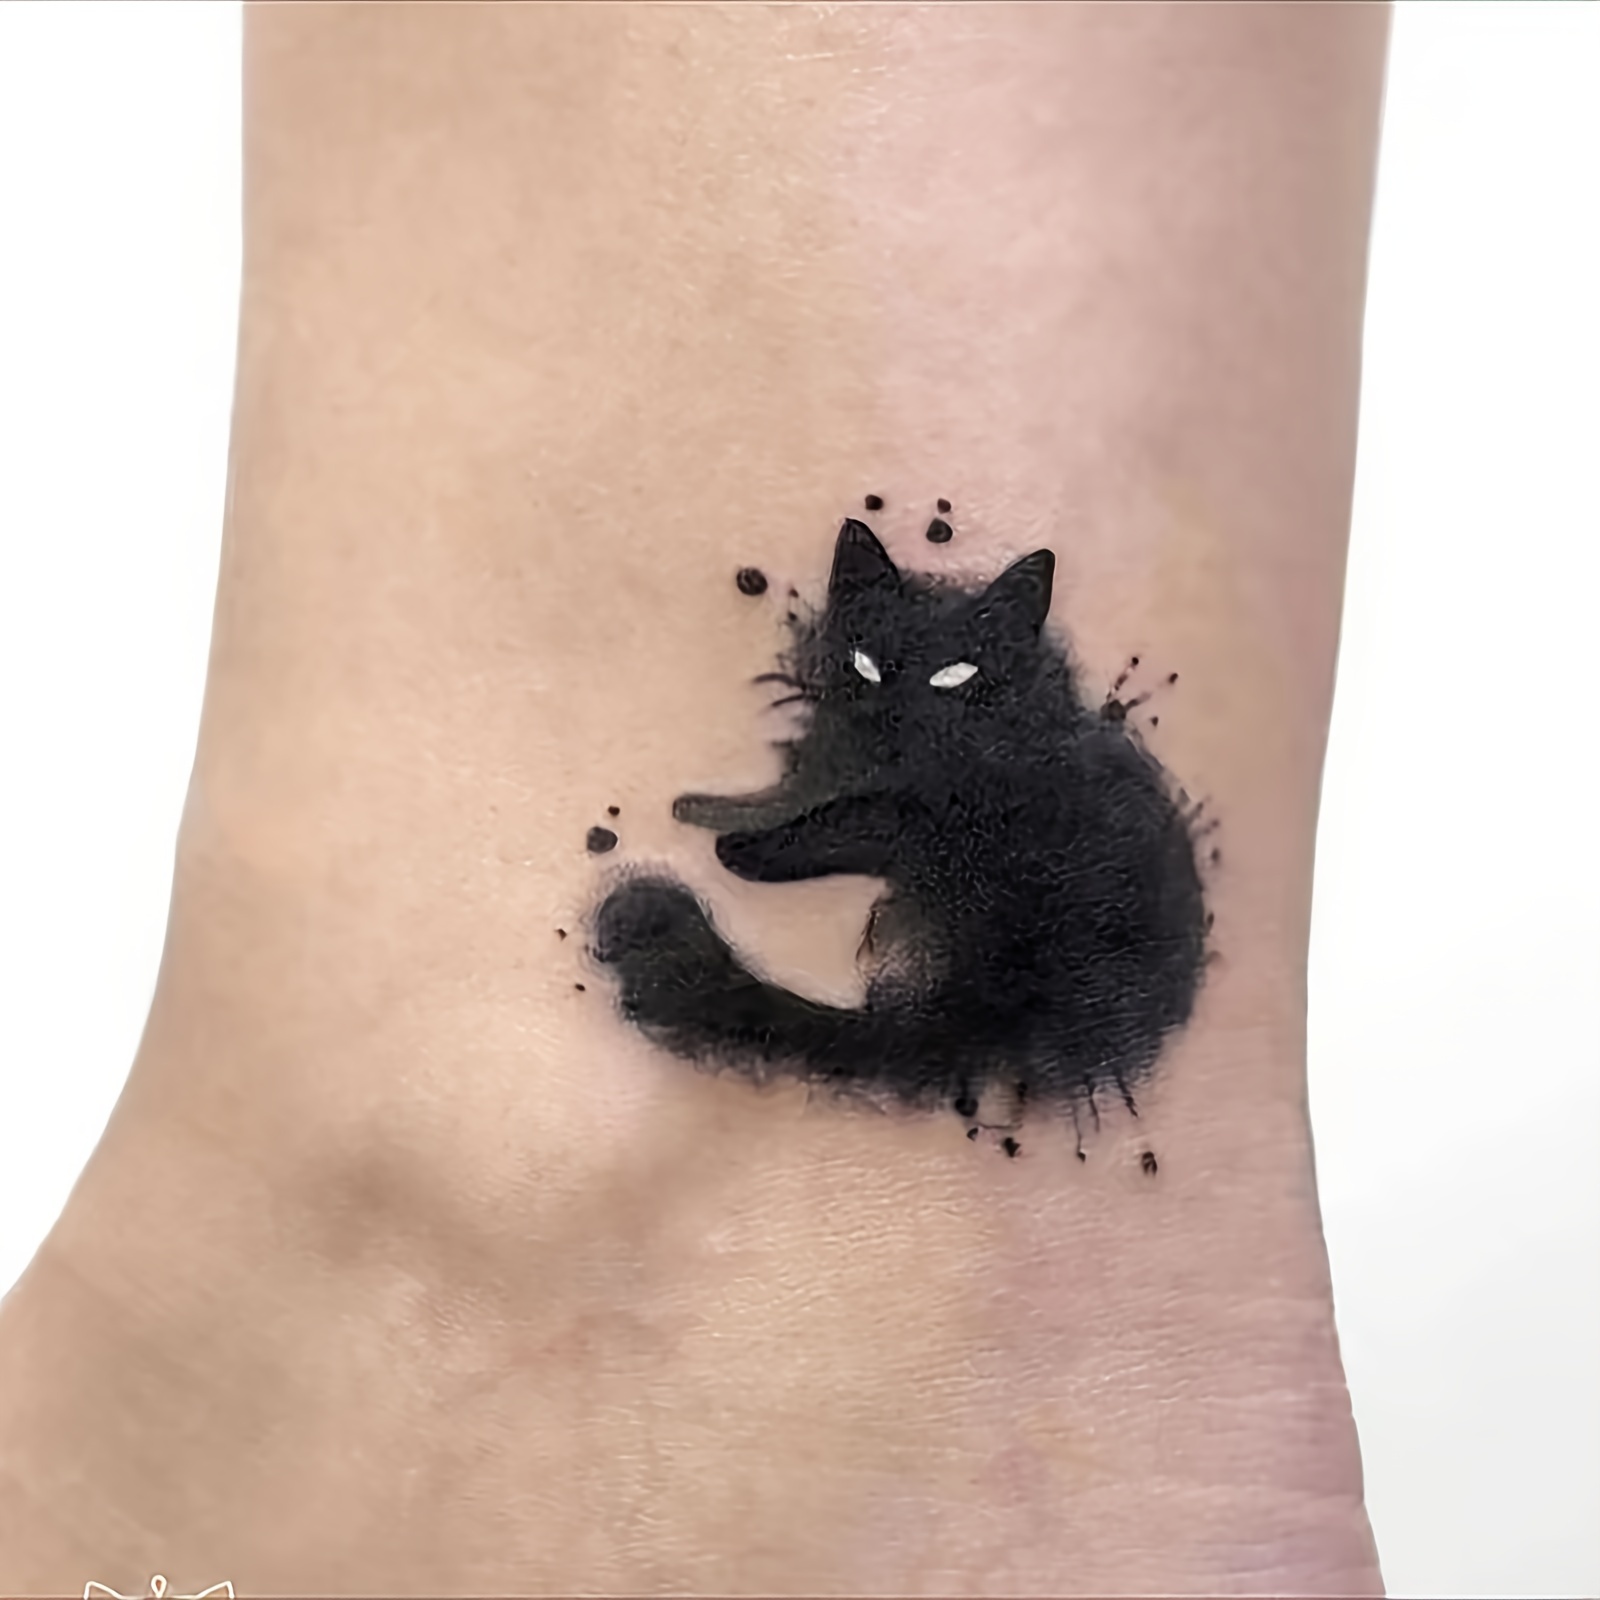 

Chic Black Cat Temporary Tattoo Stickers - Waterproof, Long-lasting, Cool & Sexy Design For Arms And Collarbones